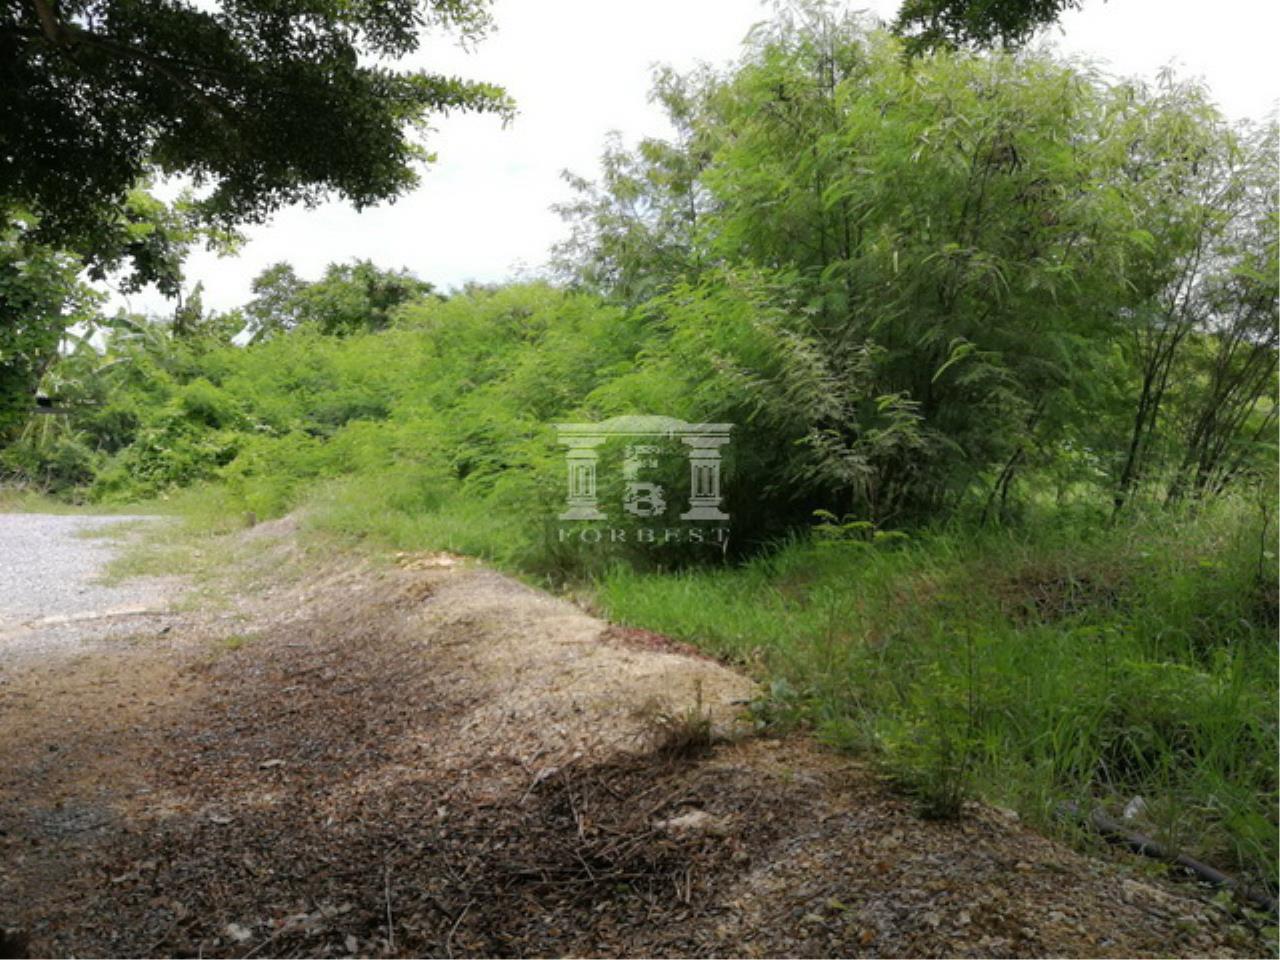 40193 Land for sale near Central Salaya Plot size 14 rai suitable to build a warehouse Housing project, ภาพที่ 3